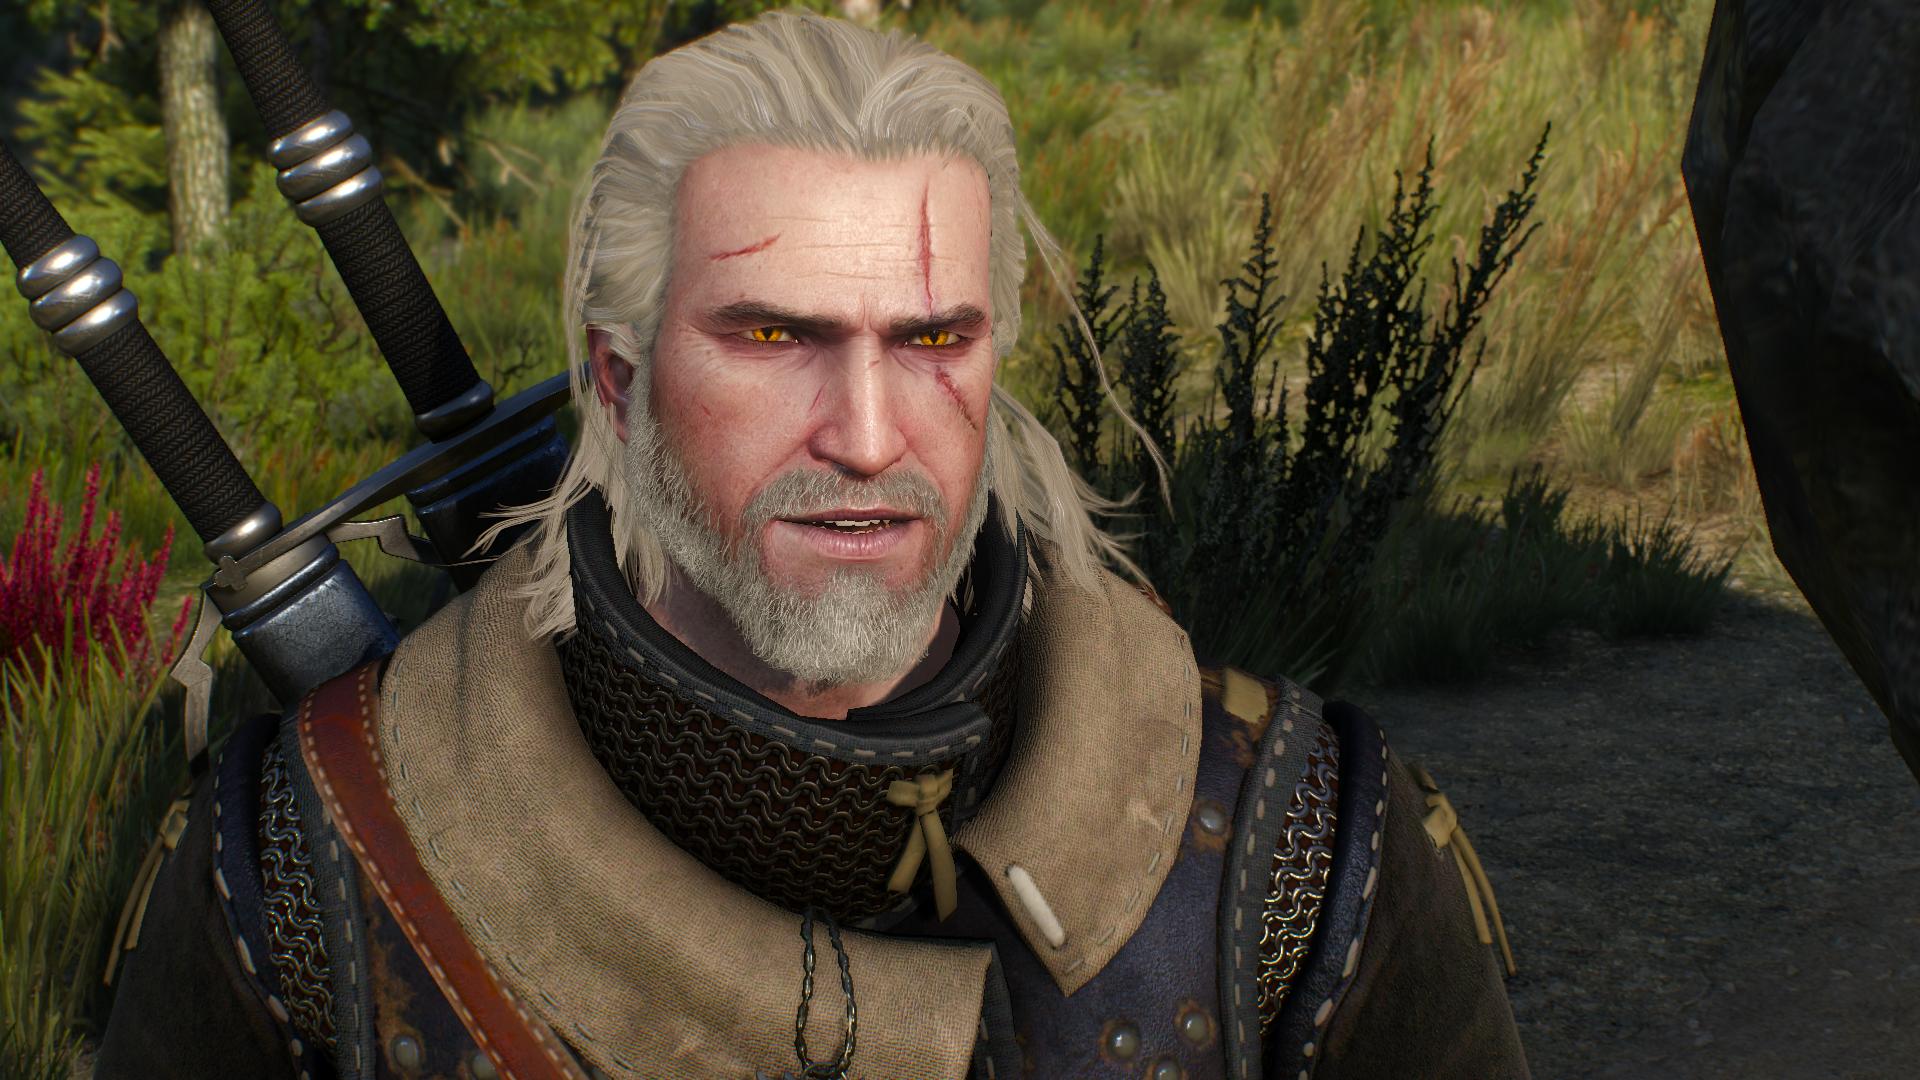 The Latest Free Witcher 3 DLC Is Really Good